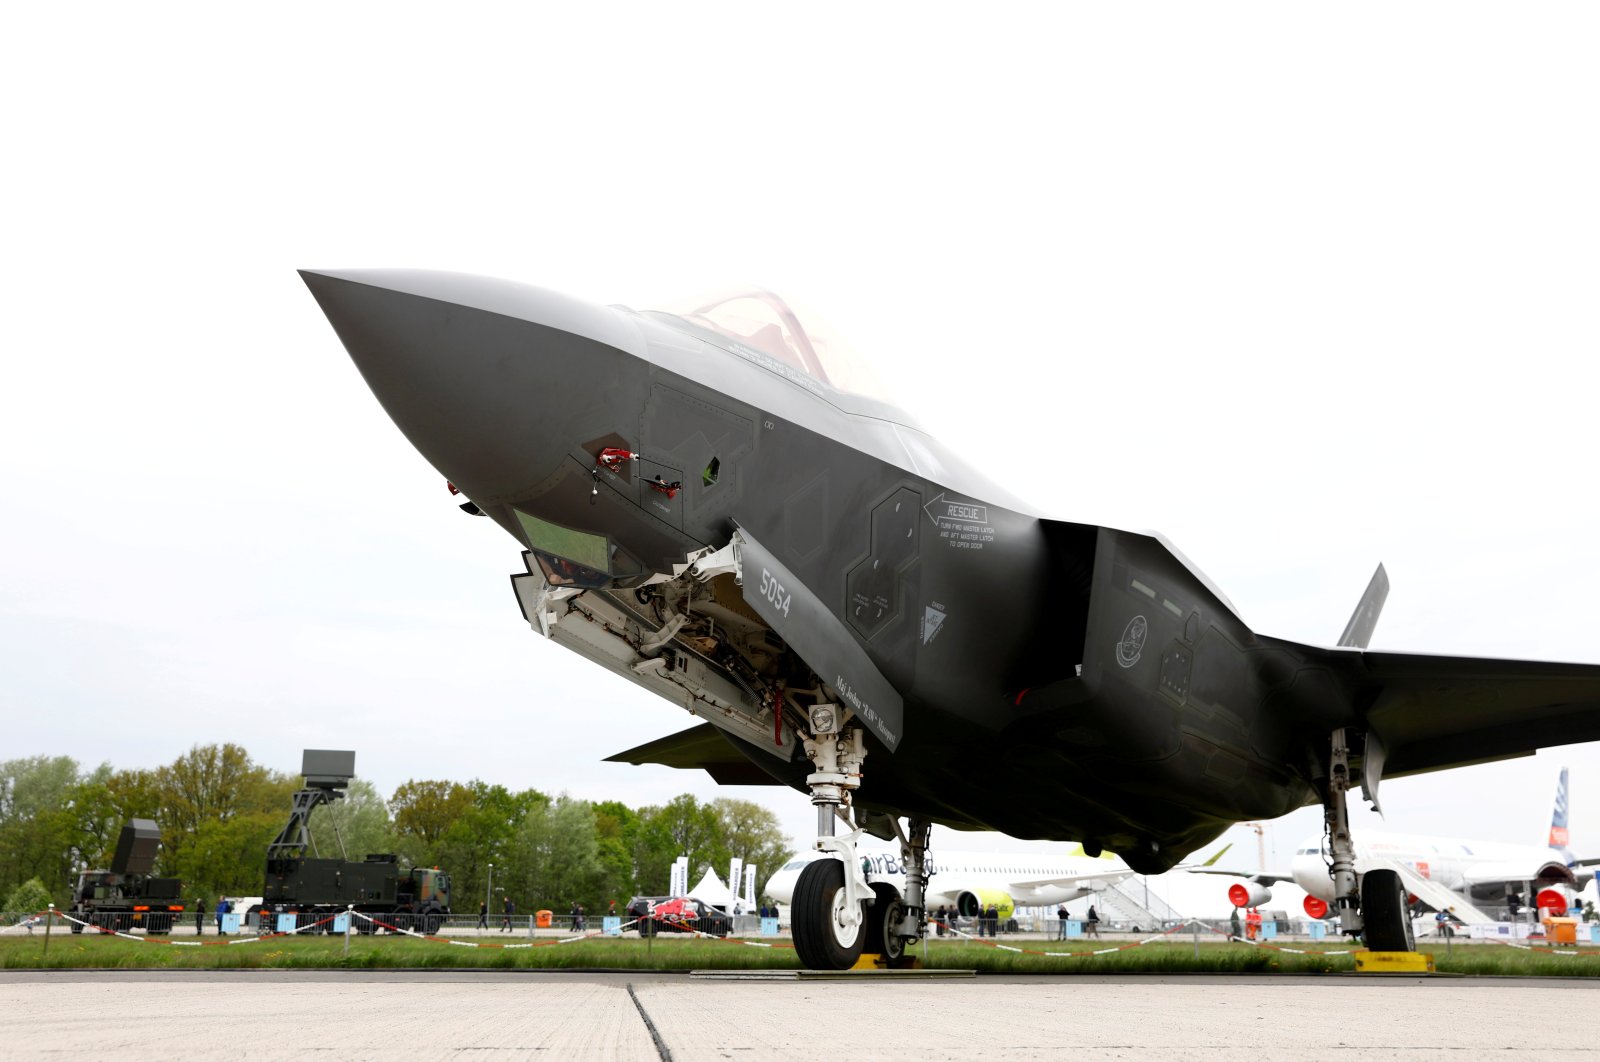 A Lockheed Martin F-35 aircraft is seen at the ILA Air Show in Berlin, Germany, April 25, 2018. (Reuters Photo)